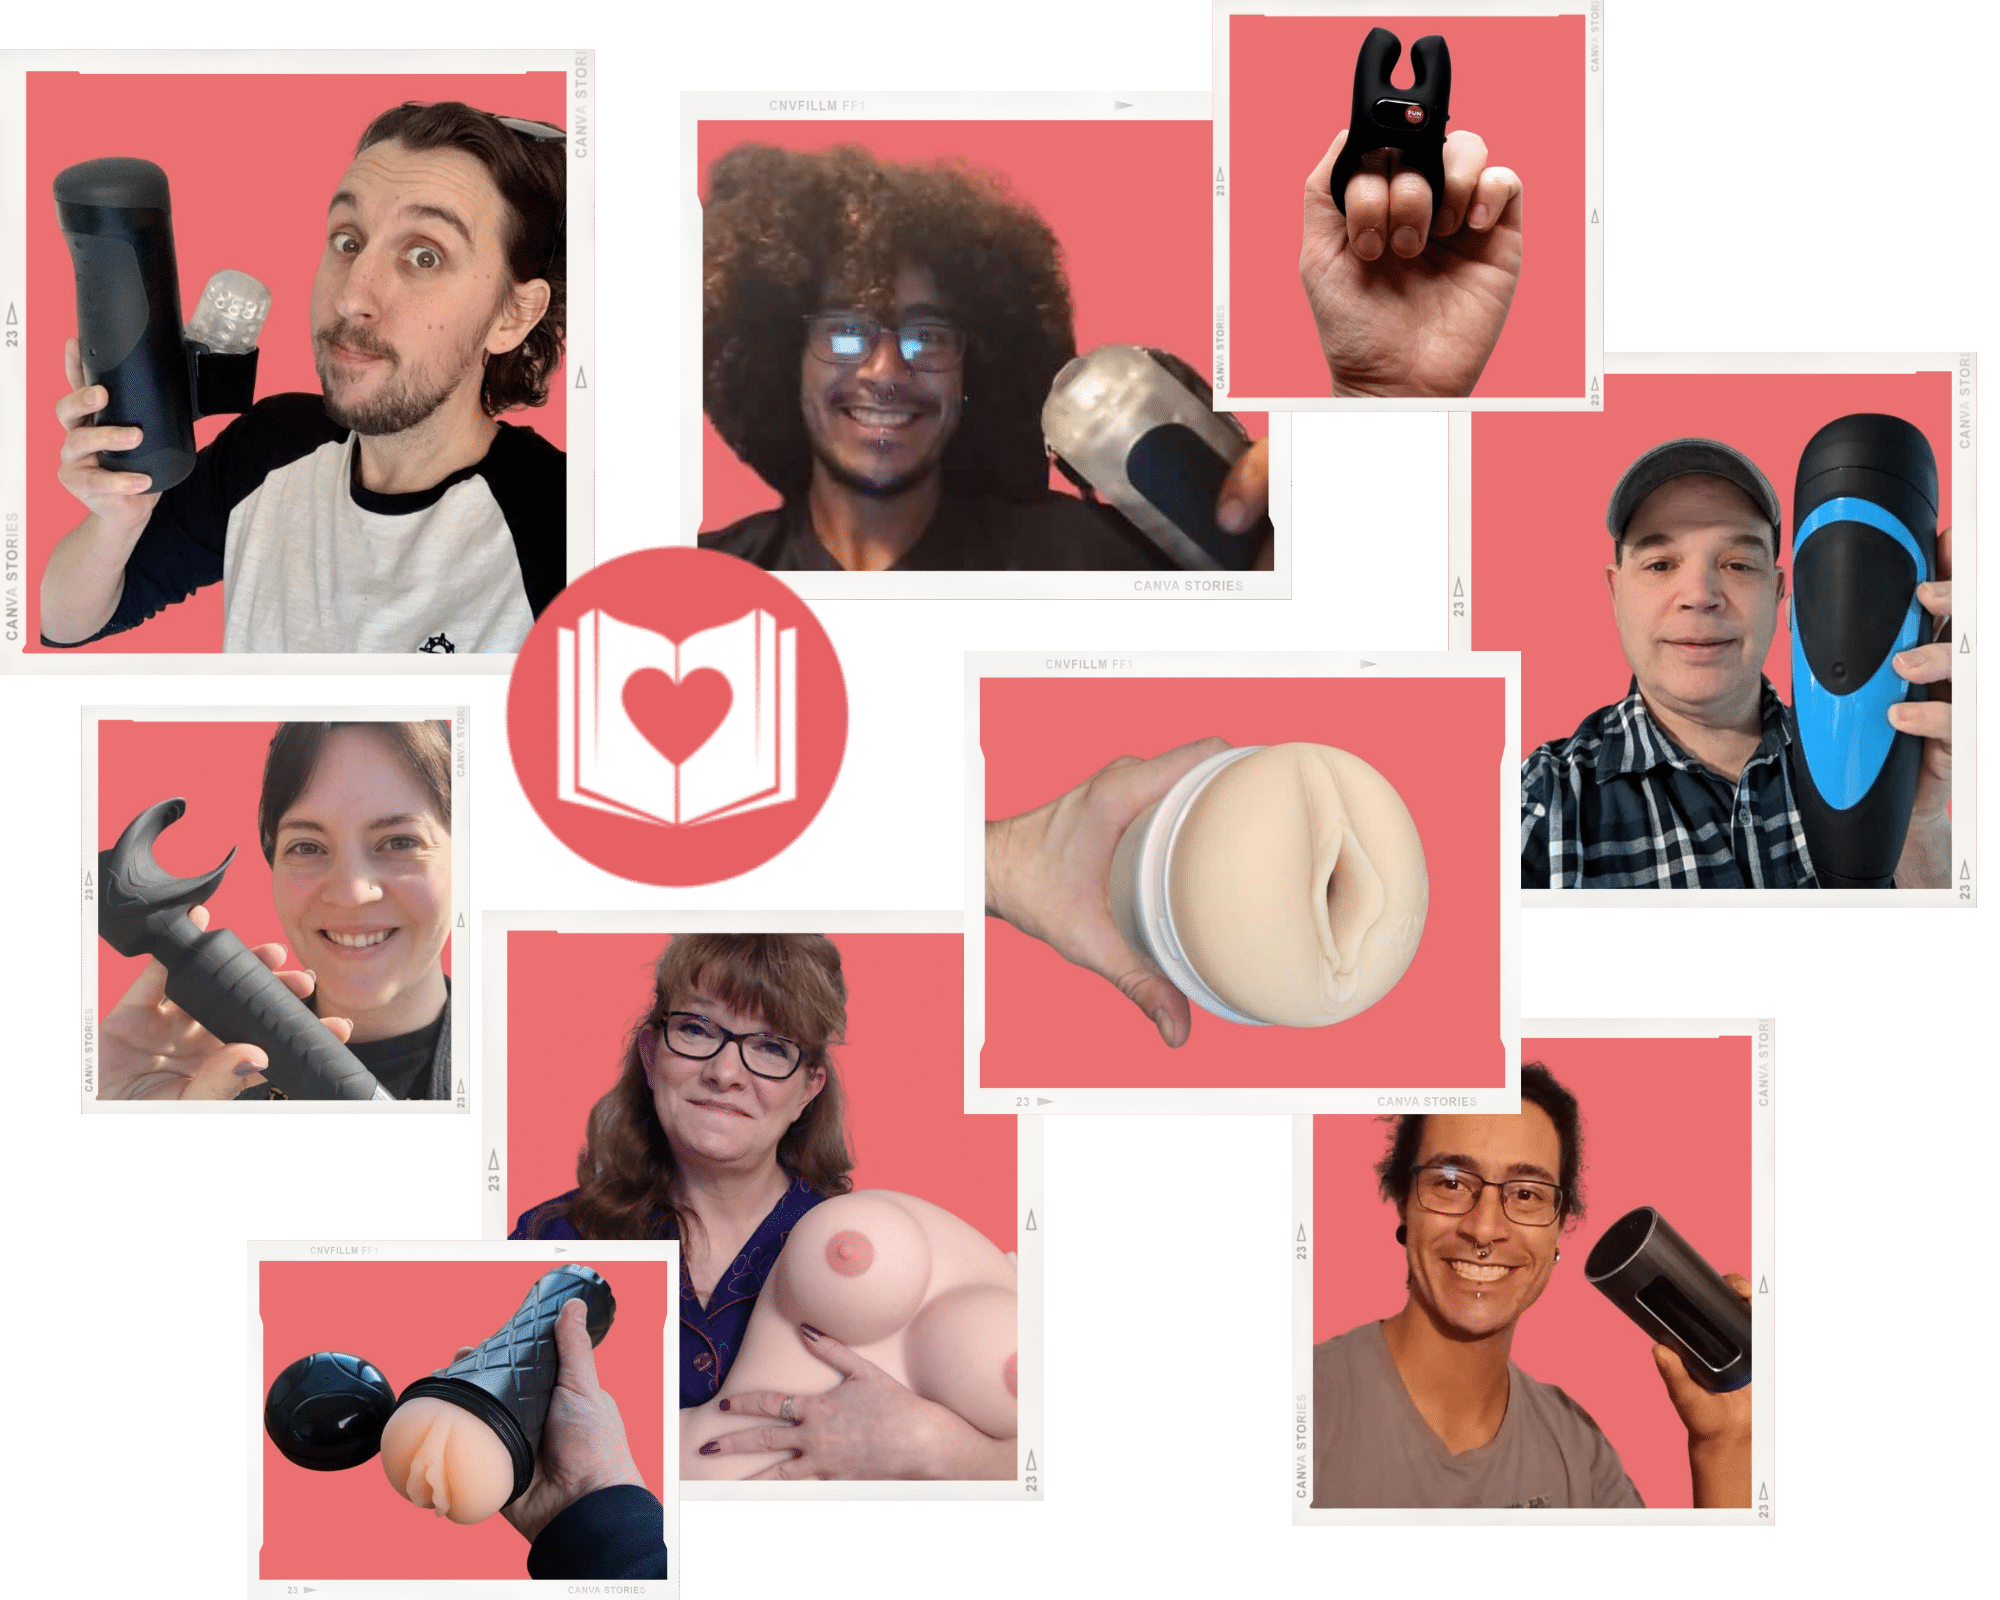 How Did We Test and Review Fleshlight Gags?